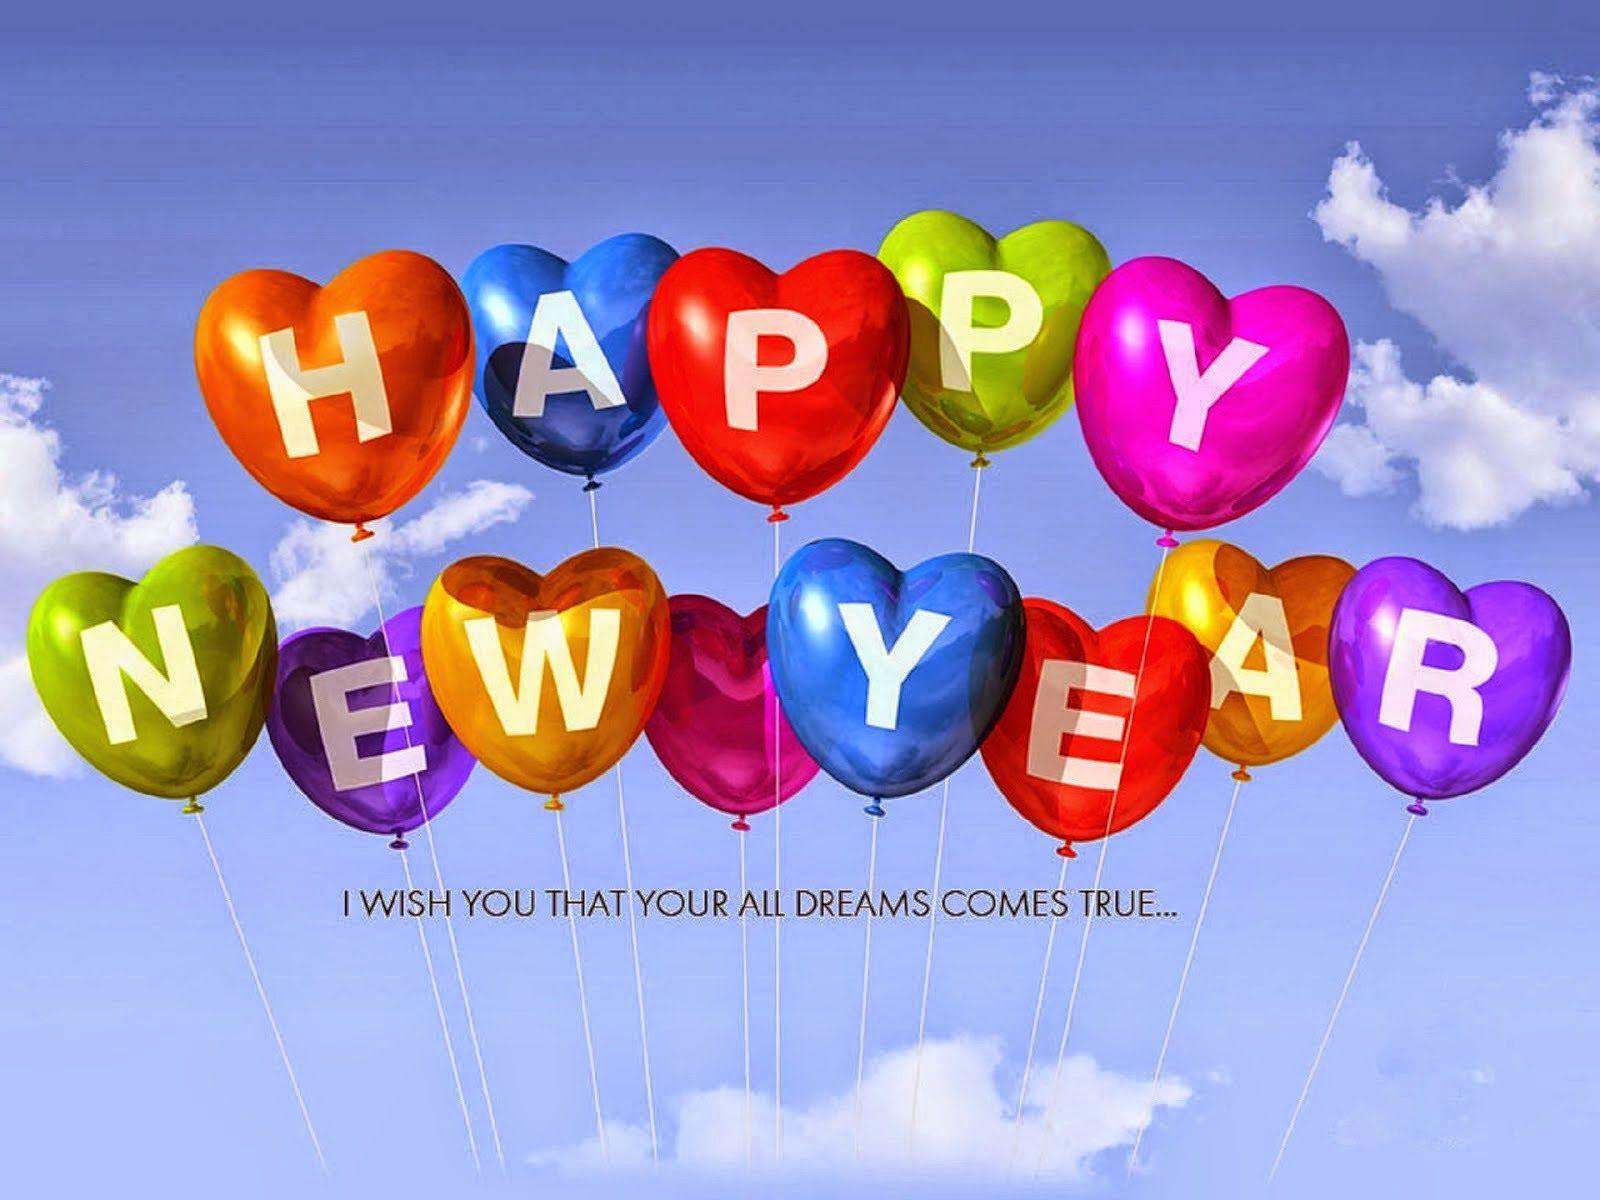 Free Happy New Year Image, Picture, Cards, Pic 2017 New